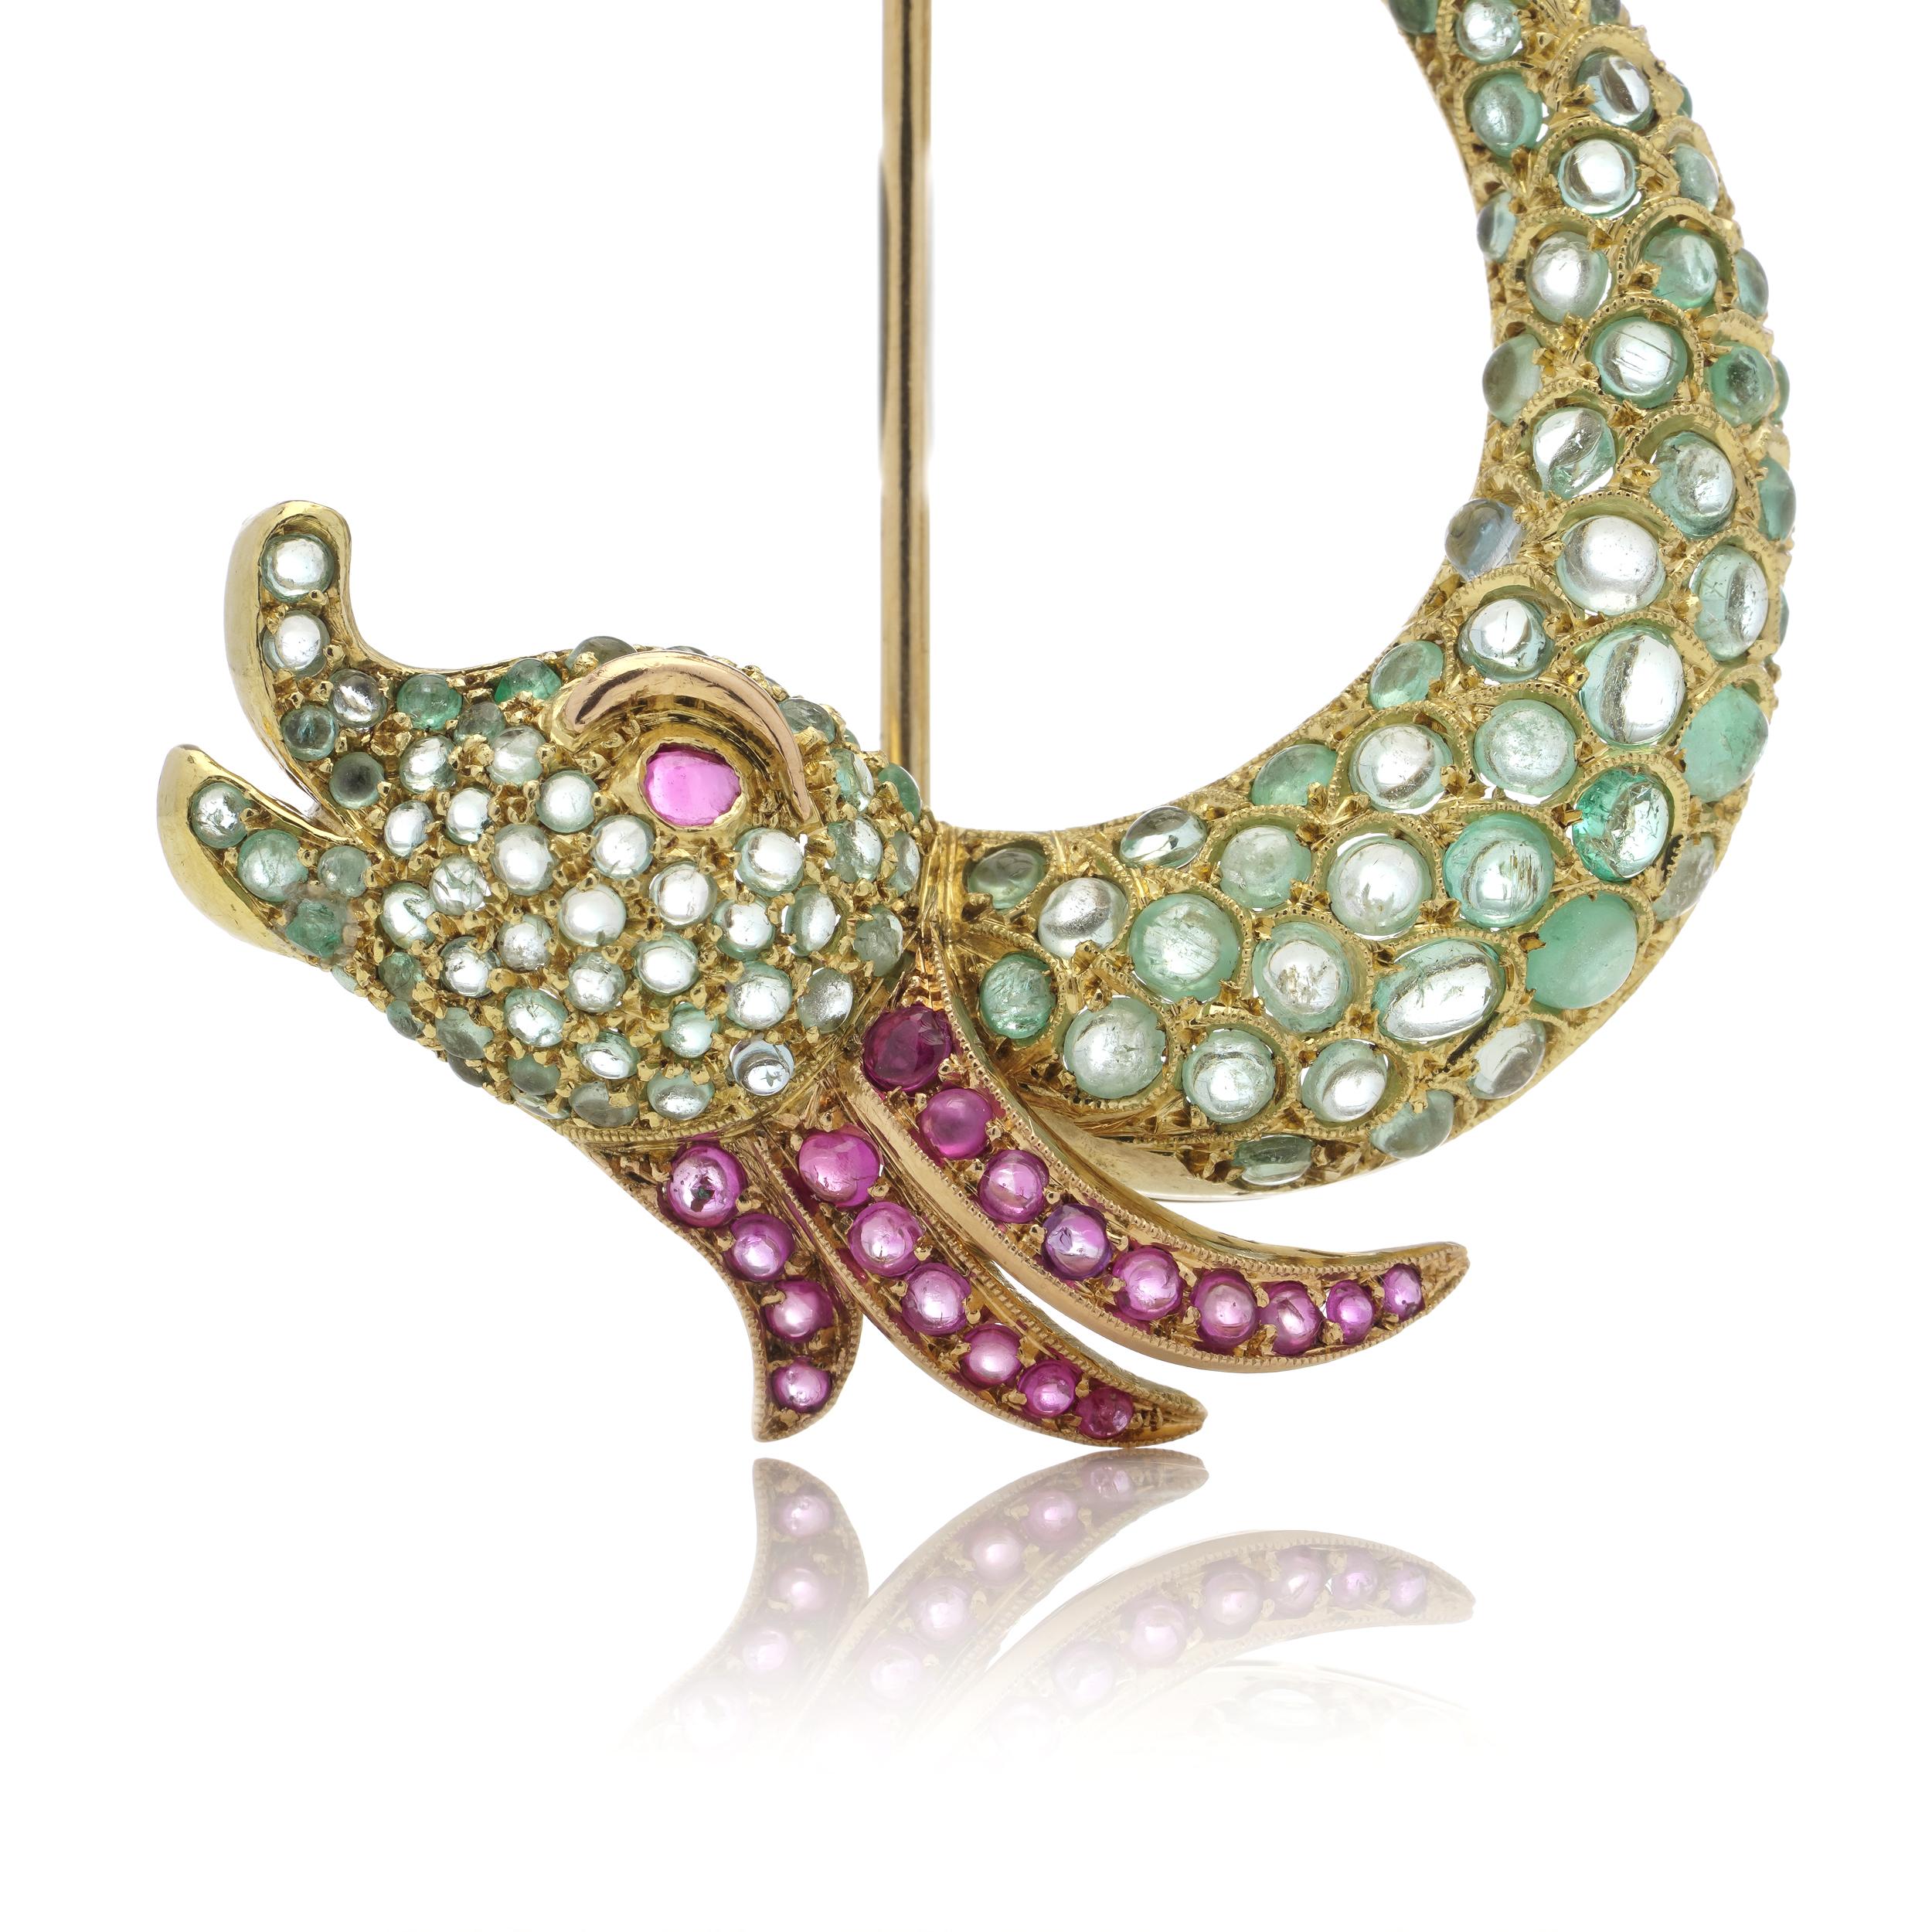 Vintage 800. gold (19.2 kt. ) yellow gold whimsical fish brooch, set with round cabochon - cut rubies and emeralds.
Made in Portugal, Circa. 1930s-1980s
Maker's mark is unidentified.

The dimensions -
5.6 x 4.1 x 1.2 cm
Weight: 15.00 grams

Emeralds